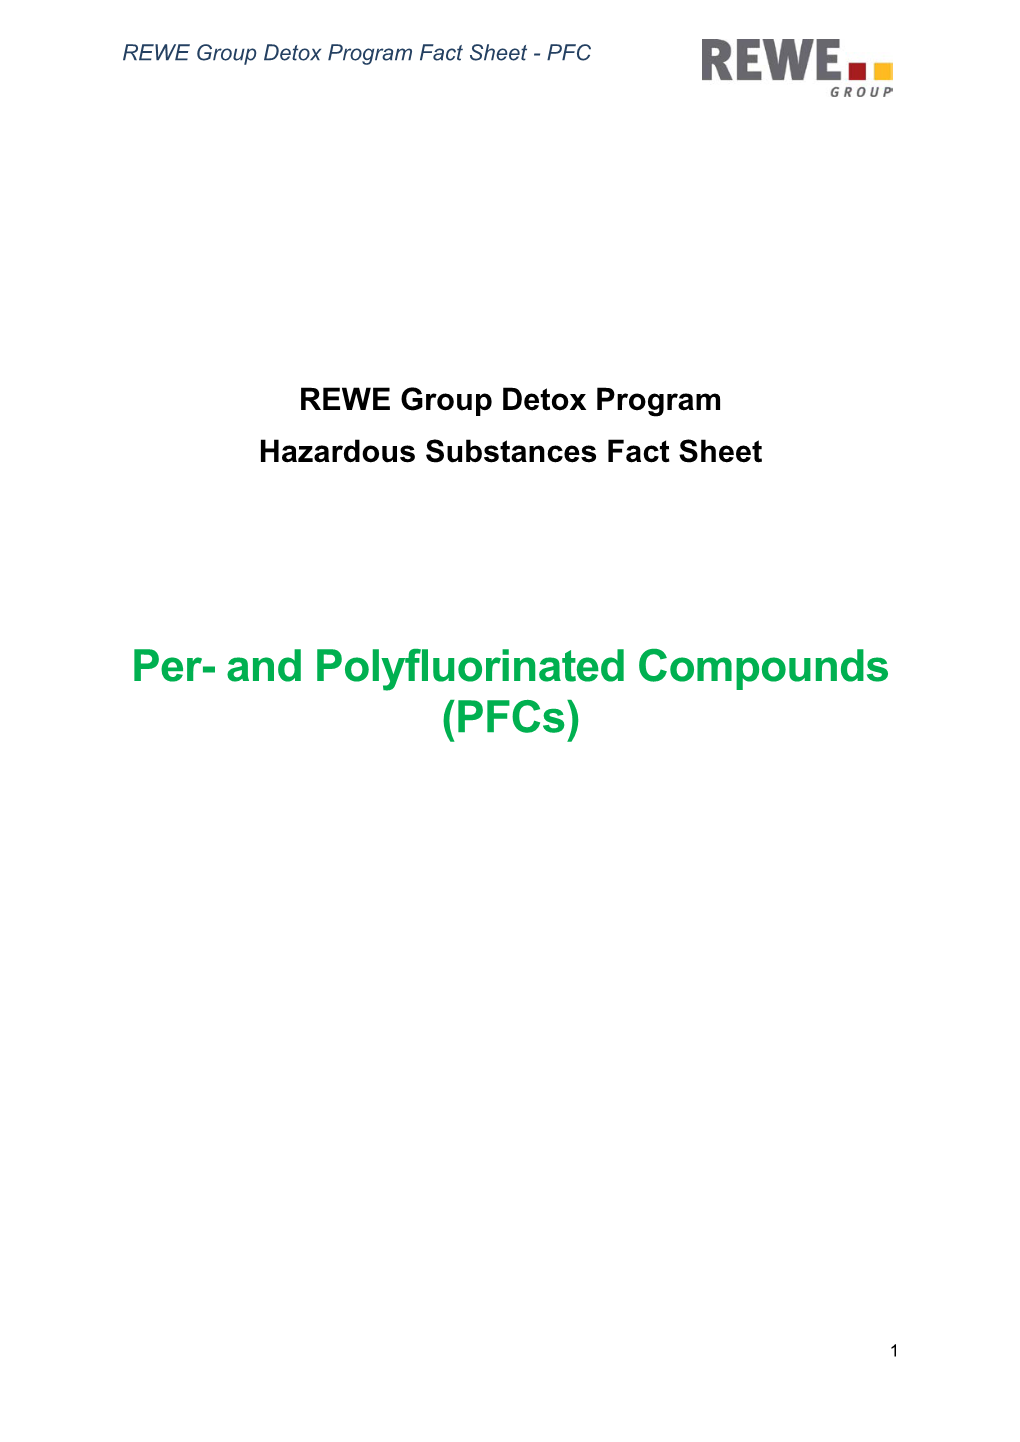 Per- and Polyfluorinated Compounds (Pfcs)